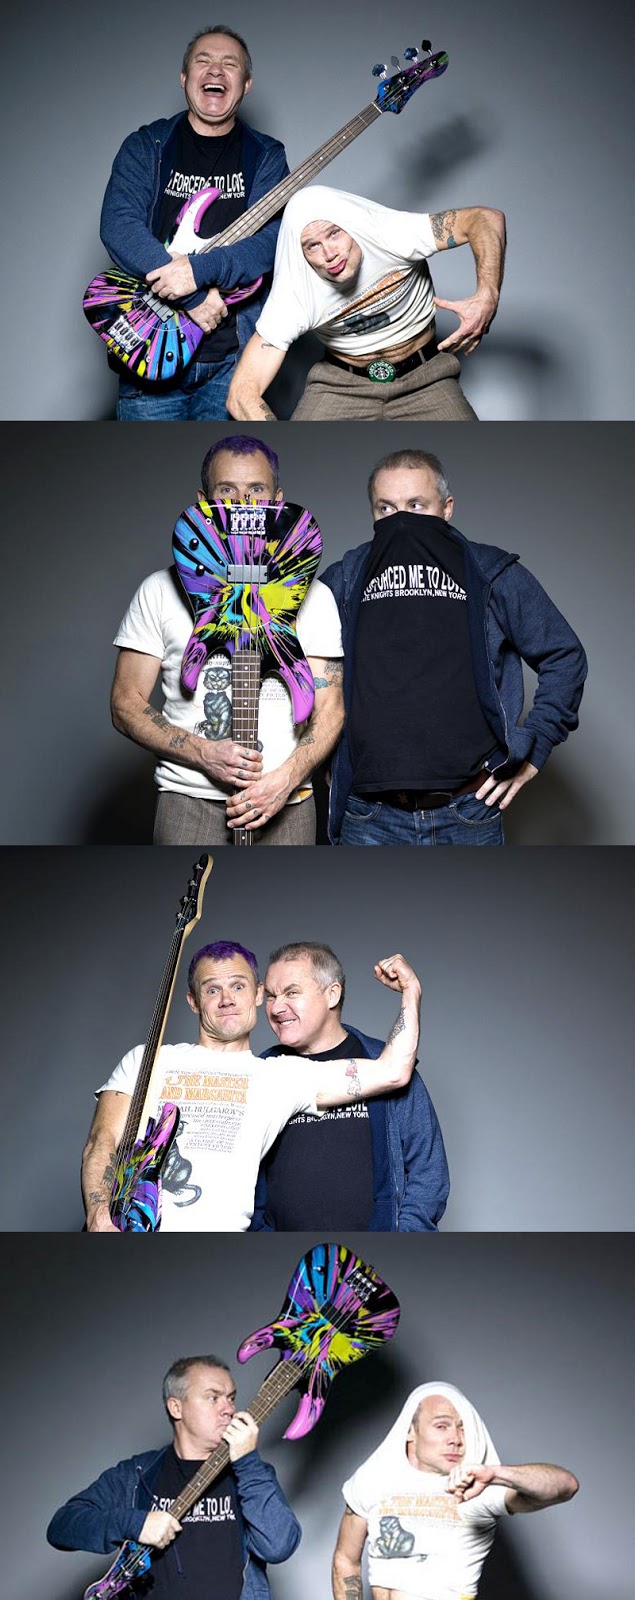 Hirst and Flea